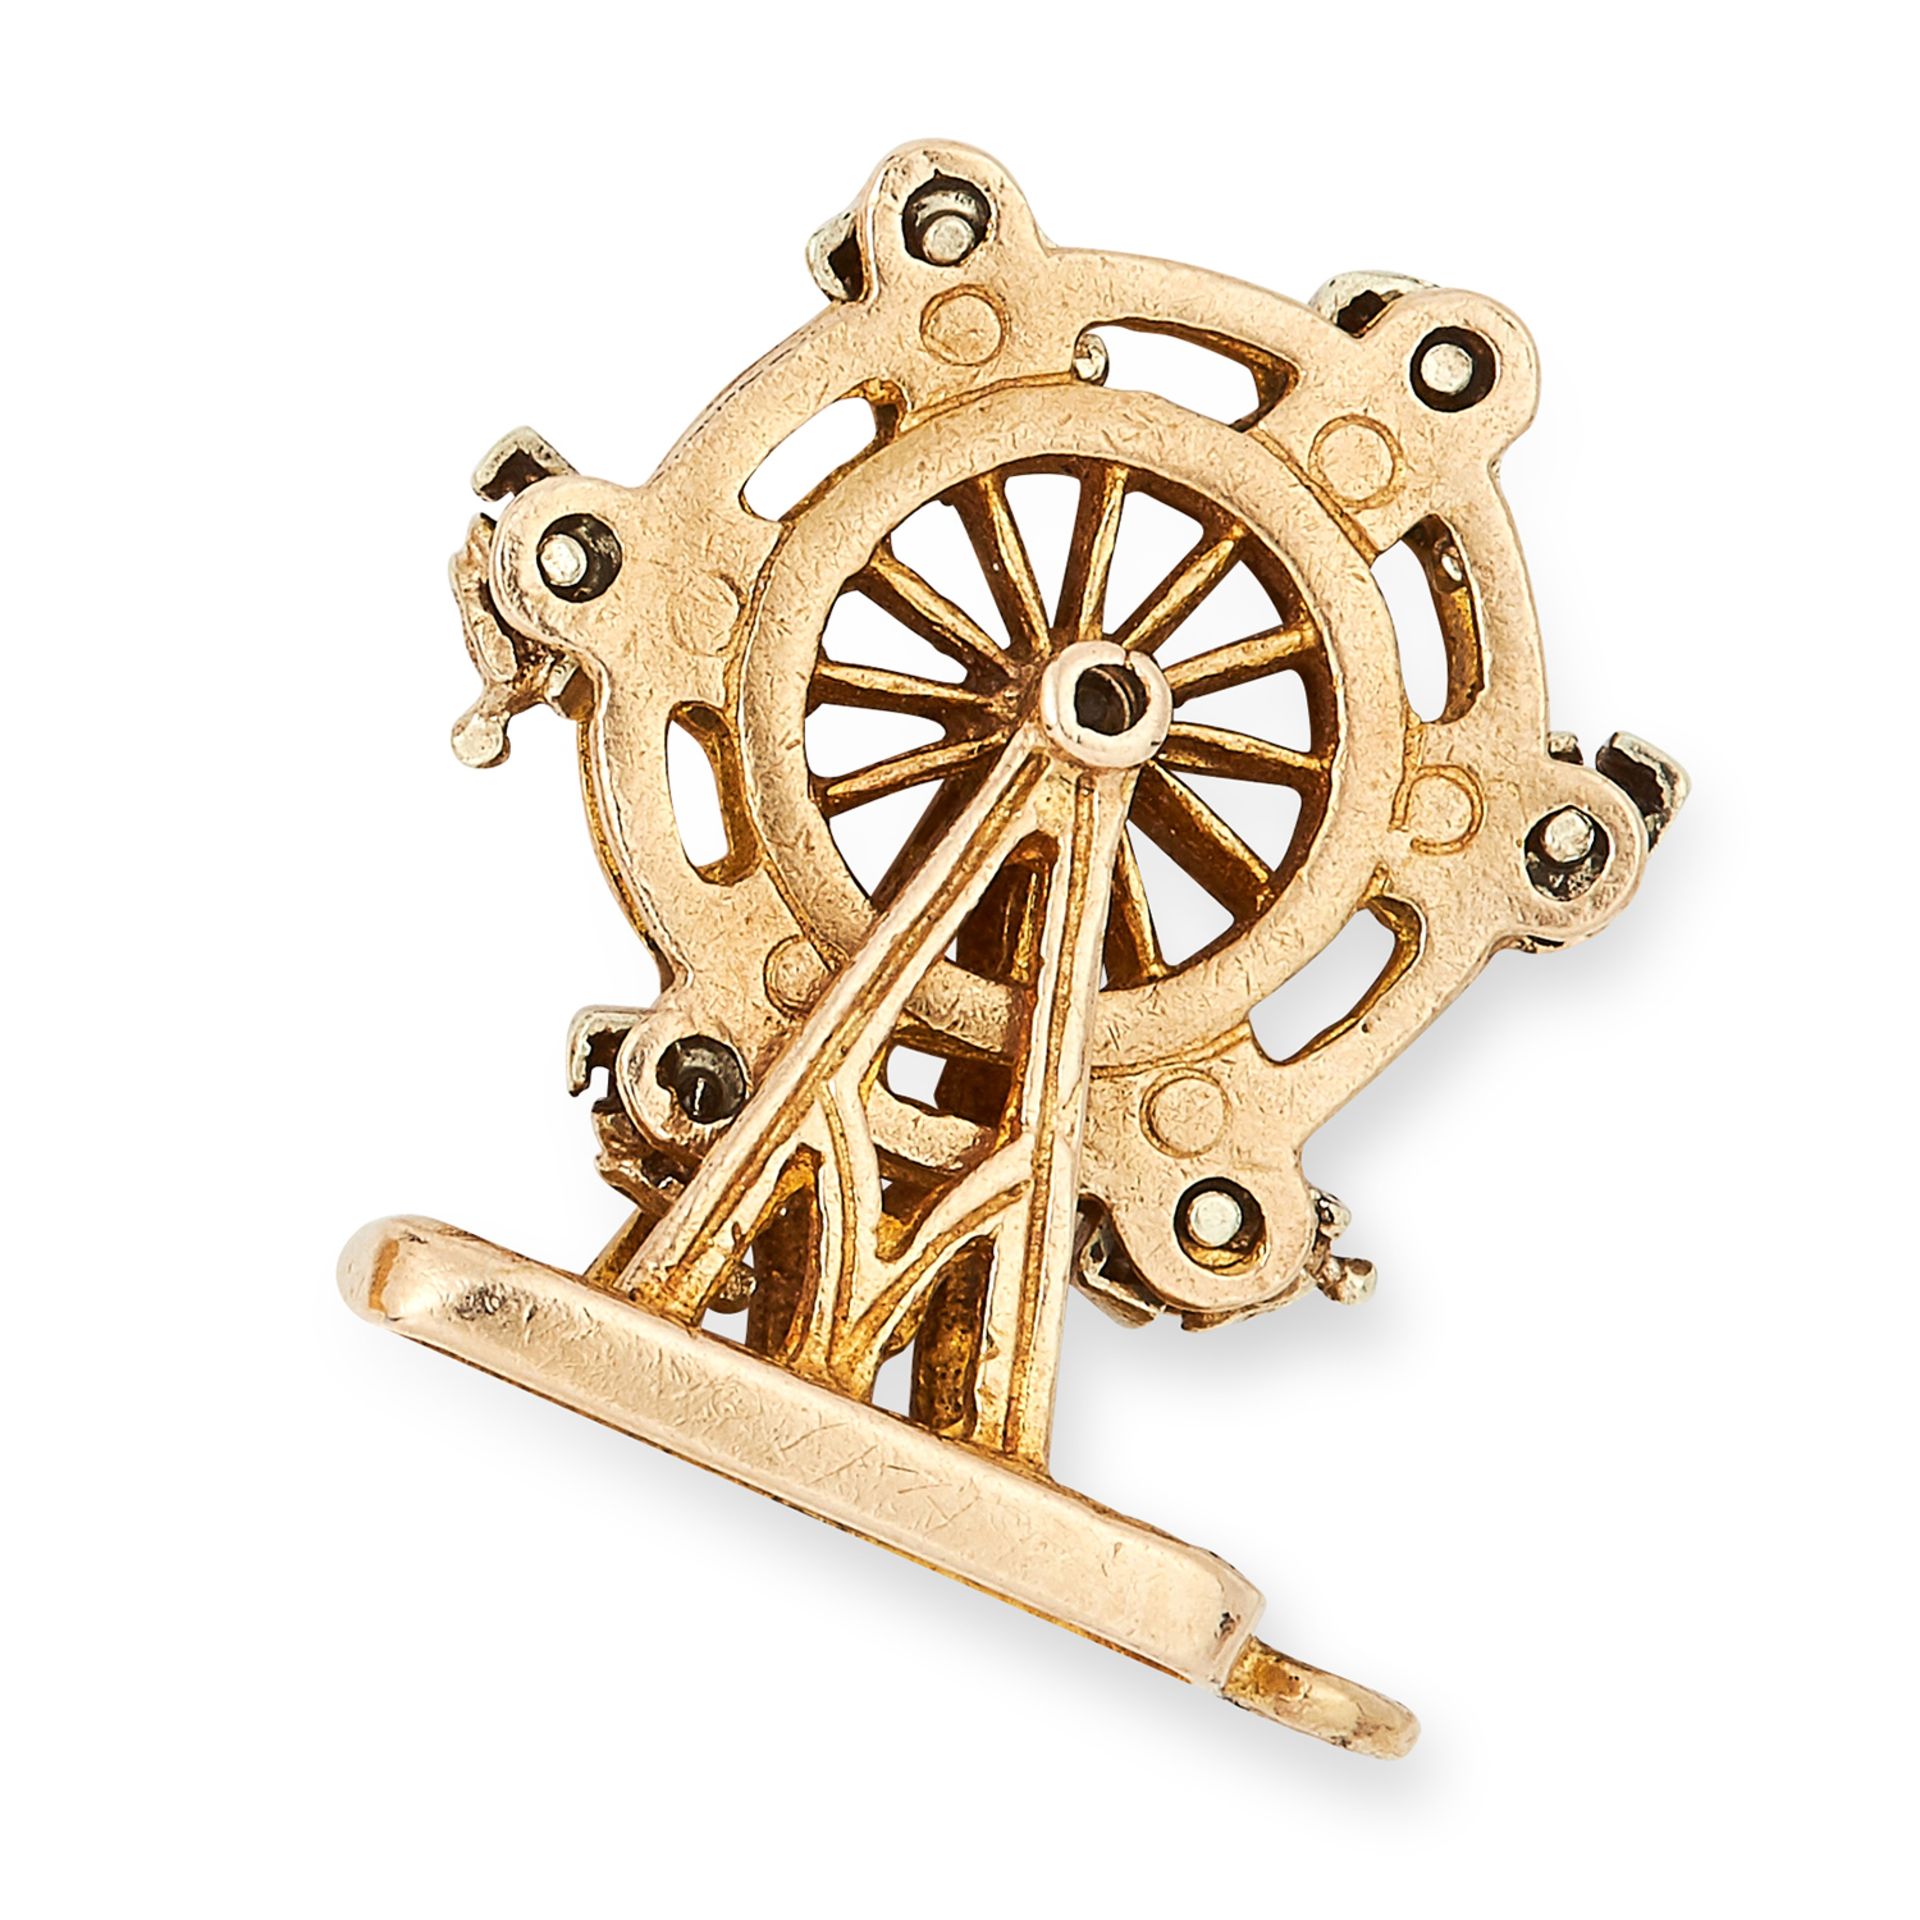 ARTICULATED FERRIS WHEEL CHARM / PENDANT with moving wheel and seats, 1.9cm, 4.1g.